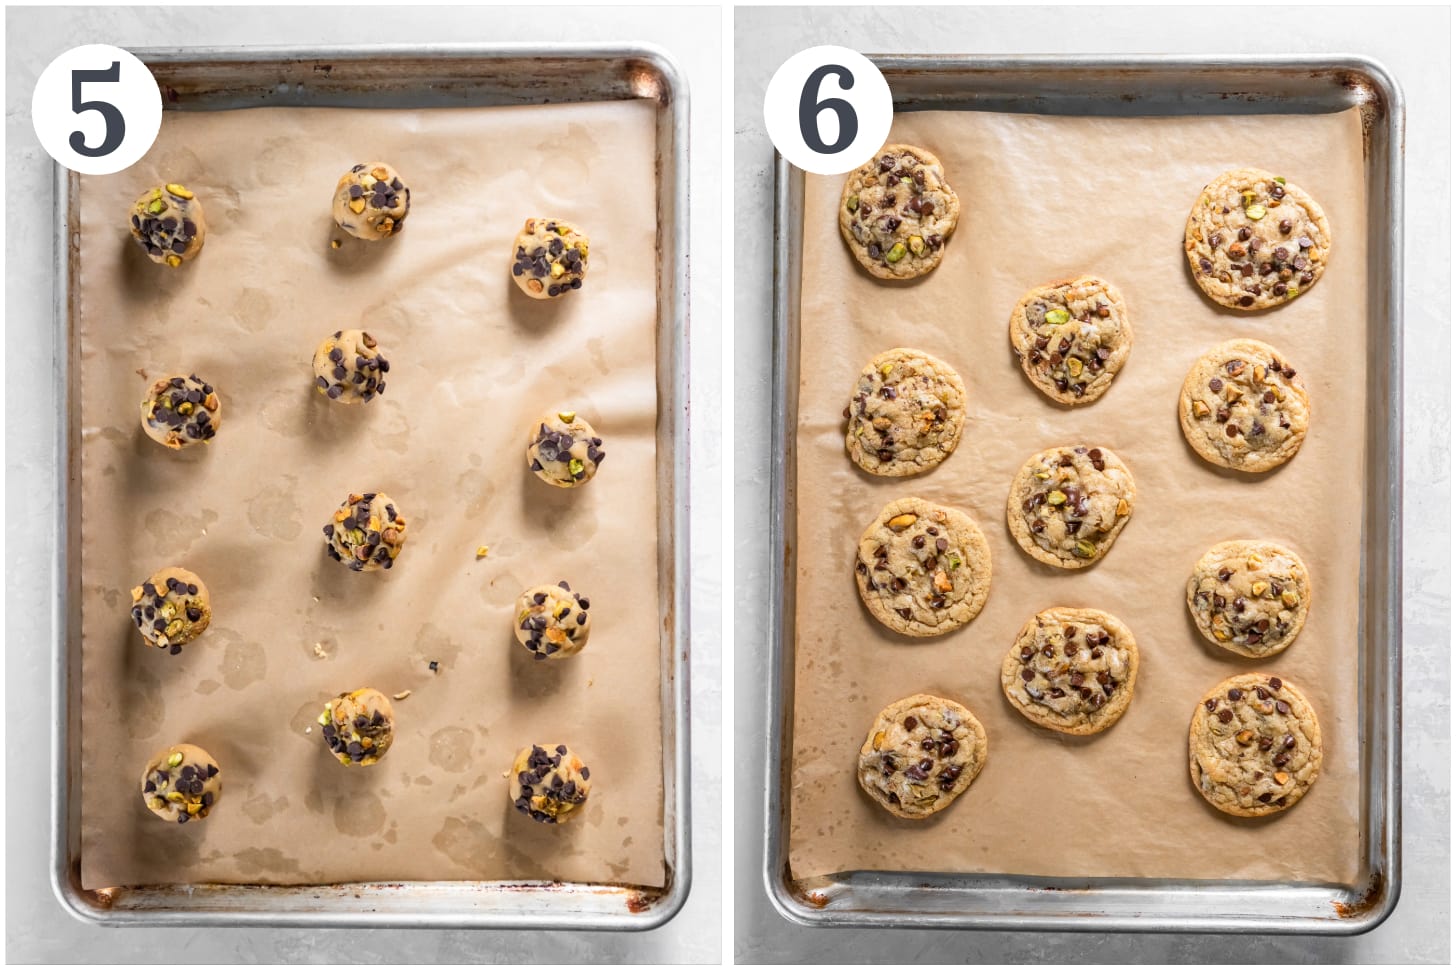 photo collage showing chocolate chip pistachio cookies on a baking sheet before and after being baked.